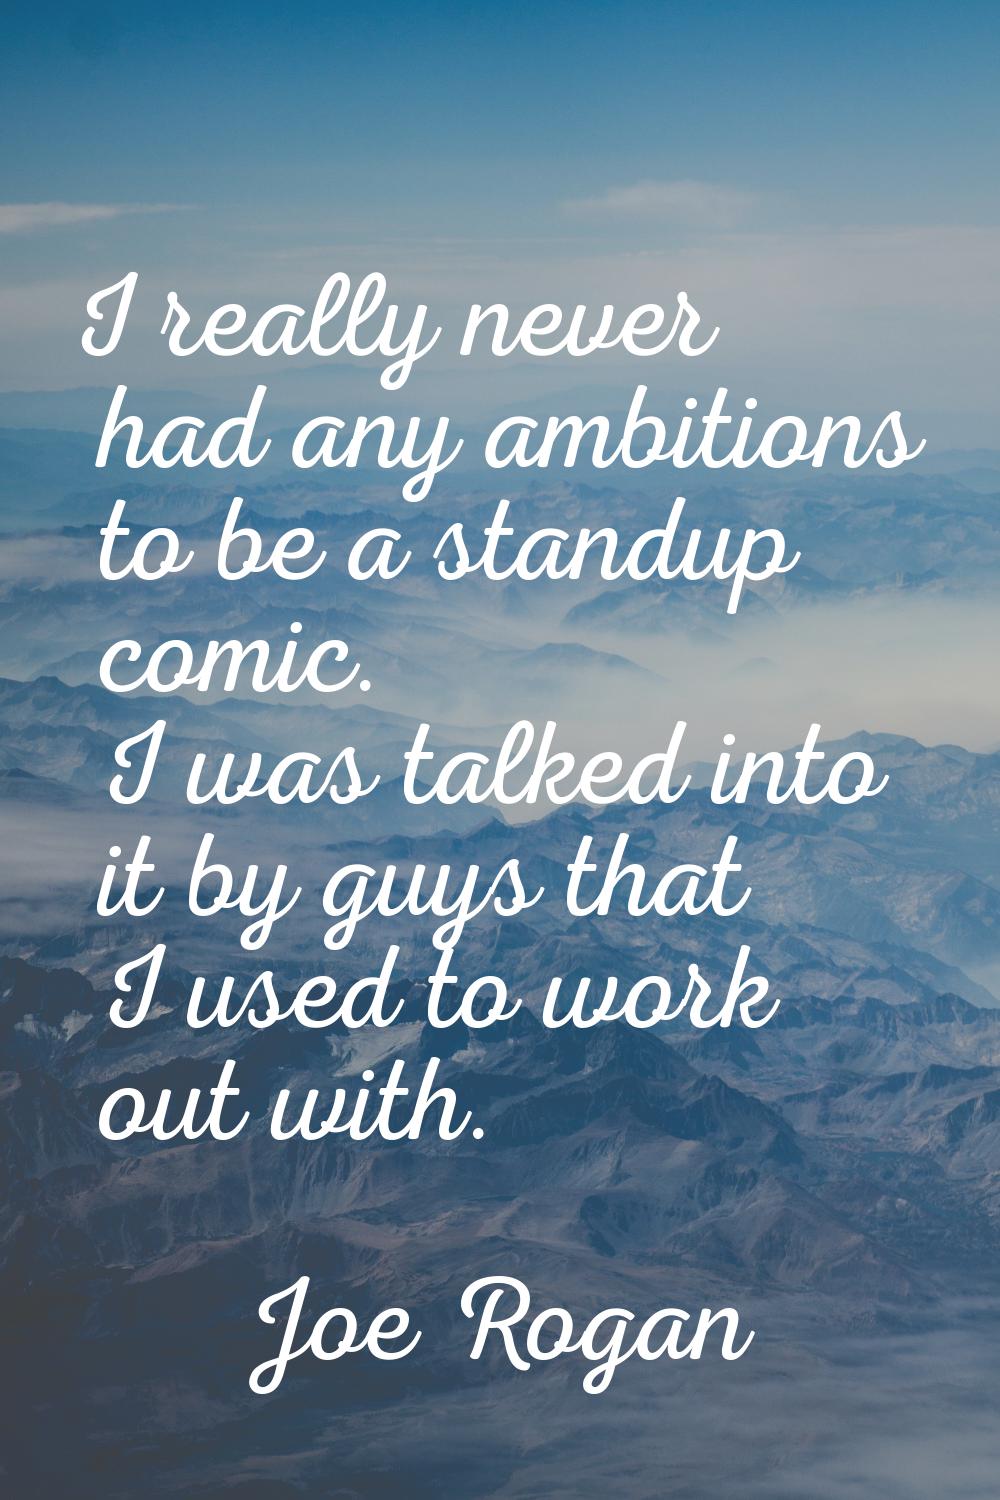 I really never had any ambitions to be a standup comic. I was talked into it by guys that I used to